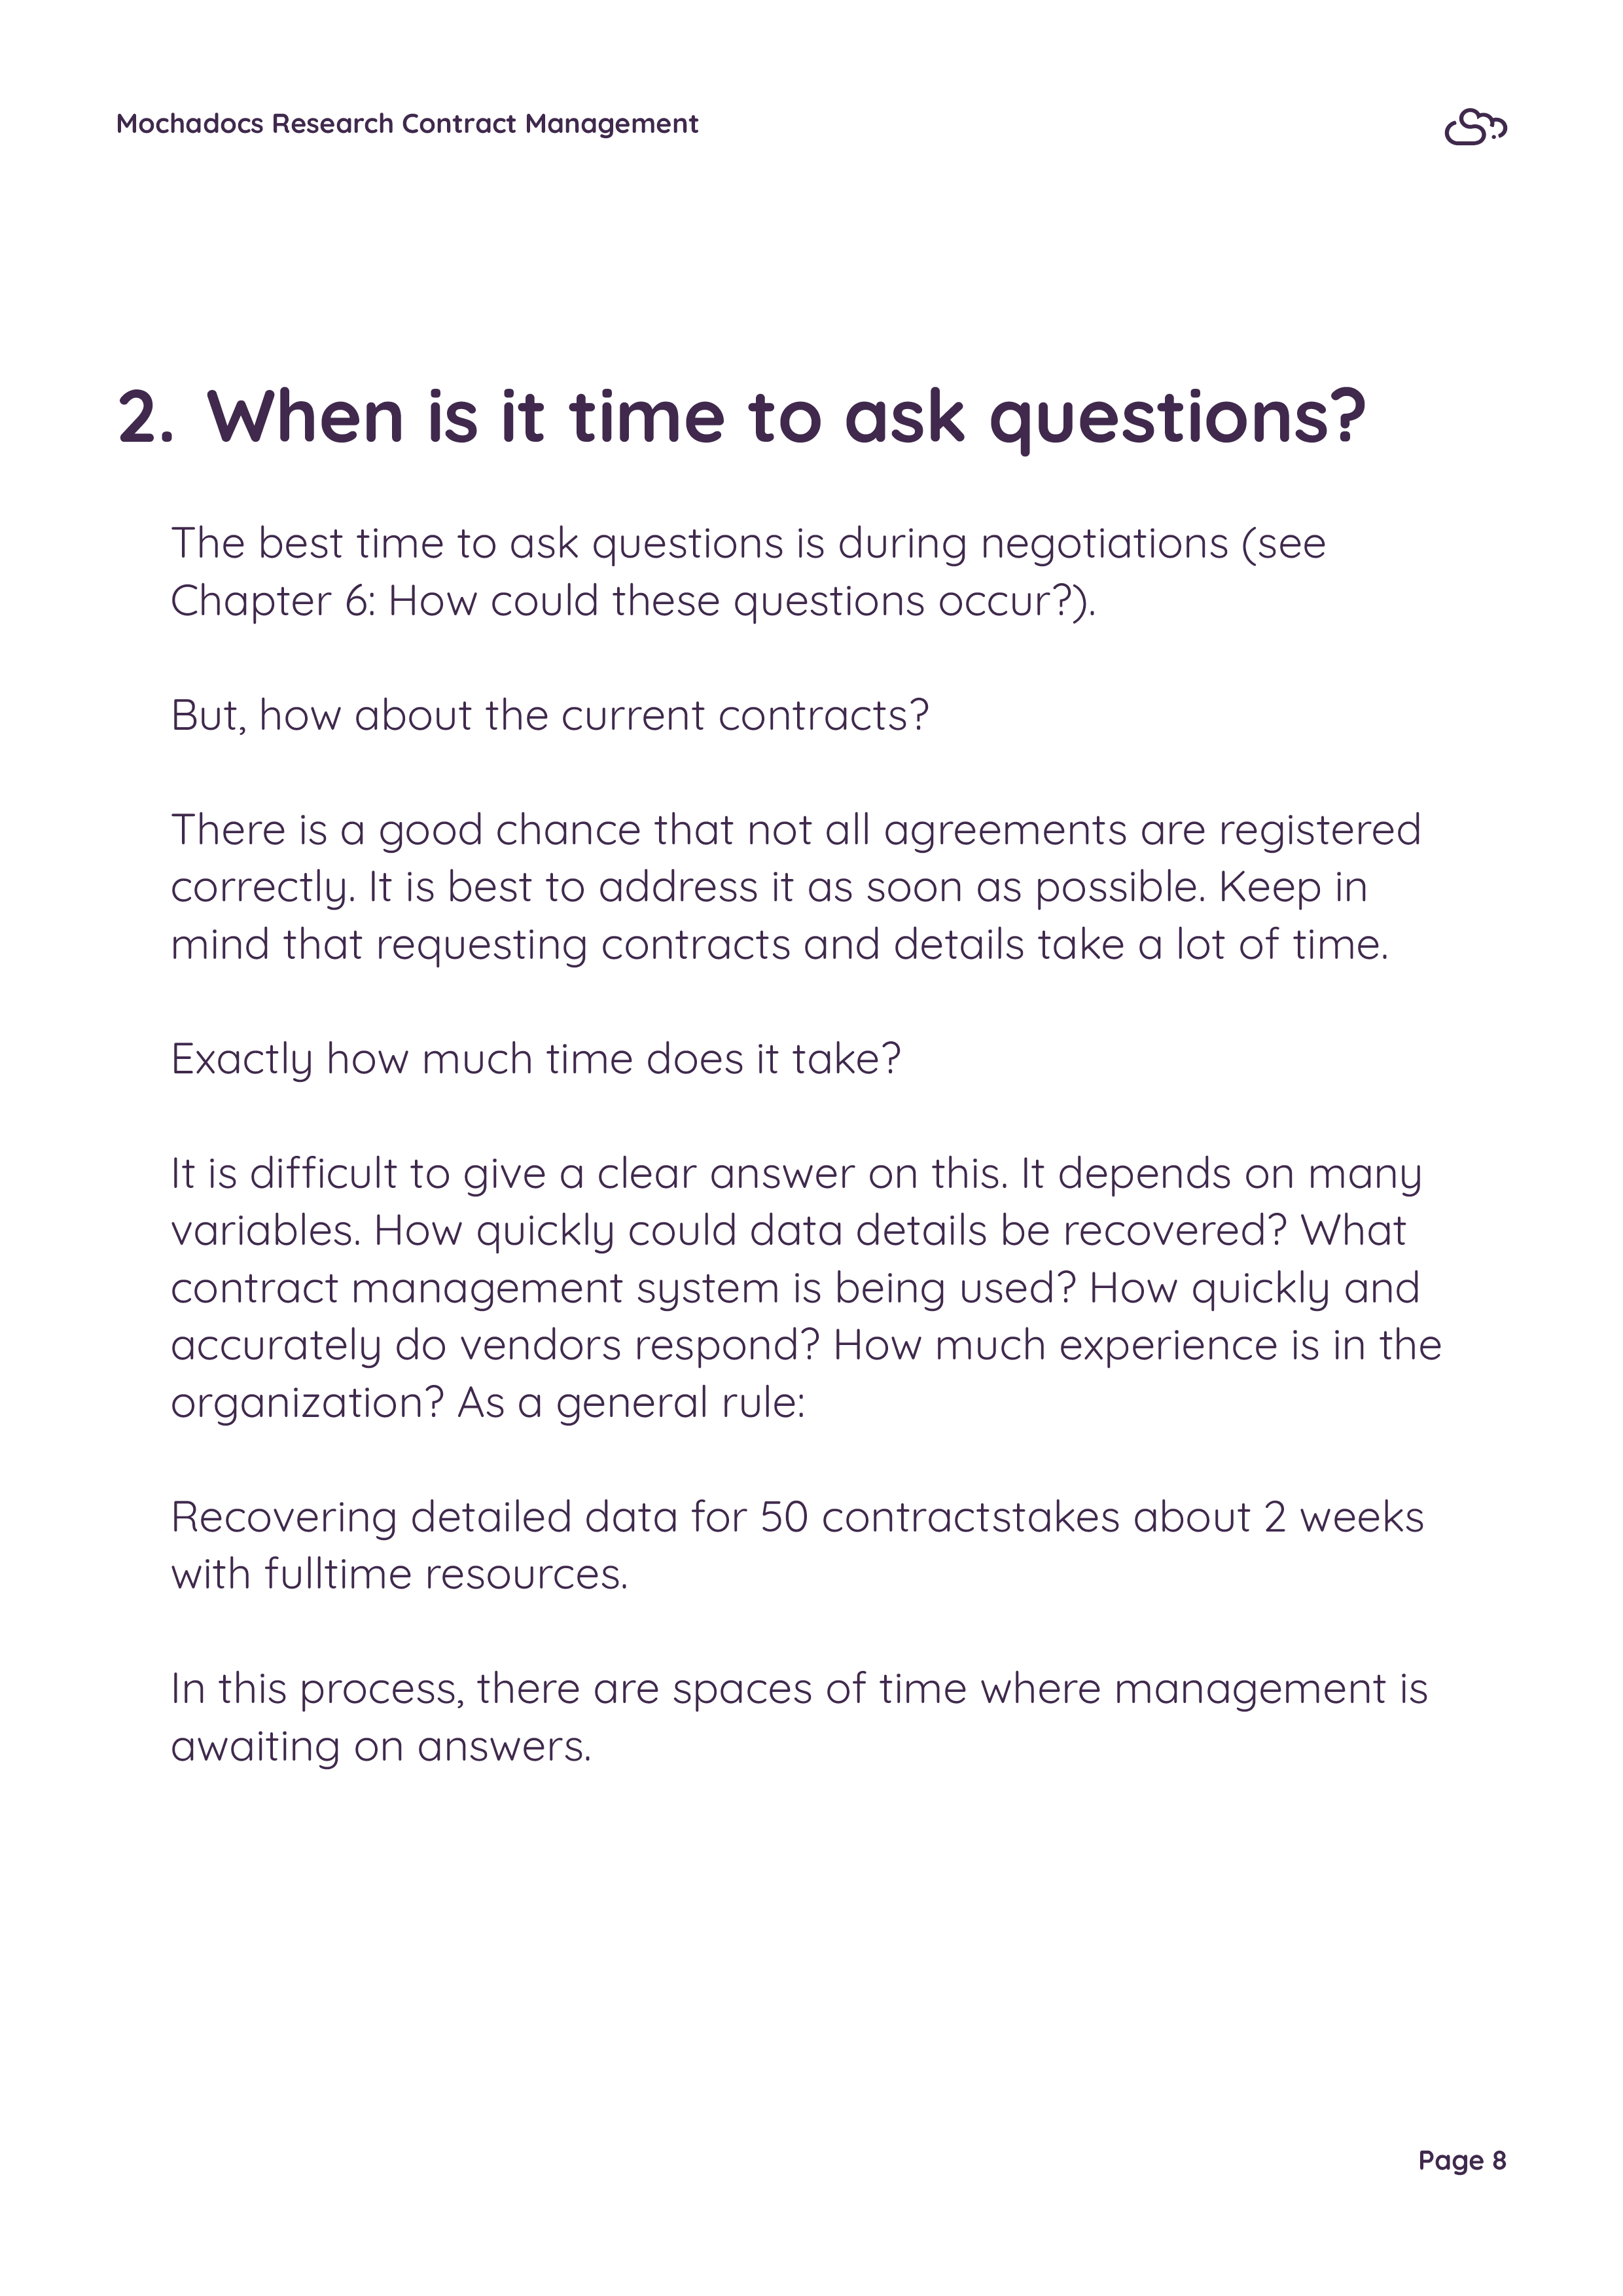 eBook Clear questions for the vendor8